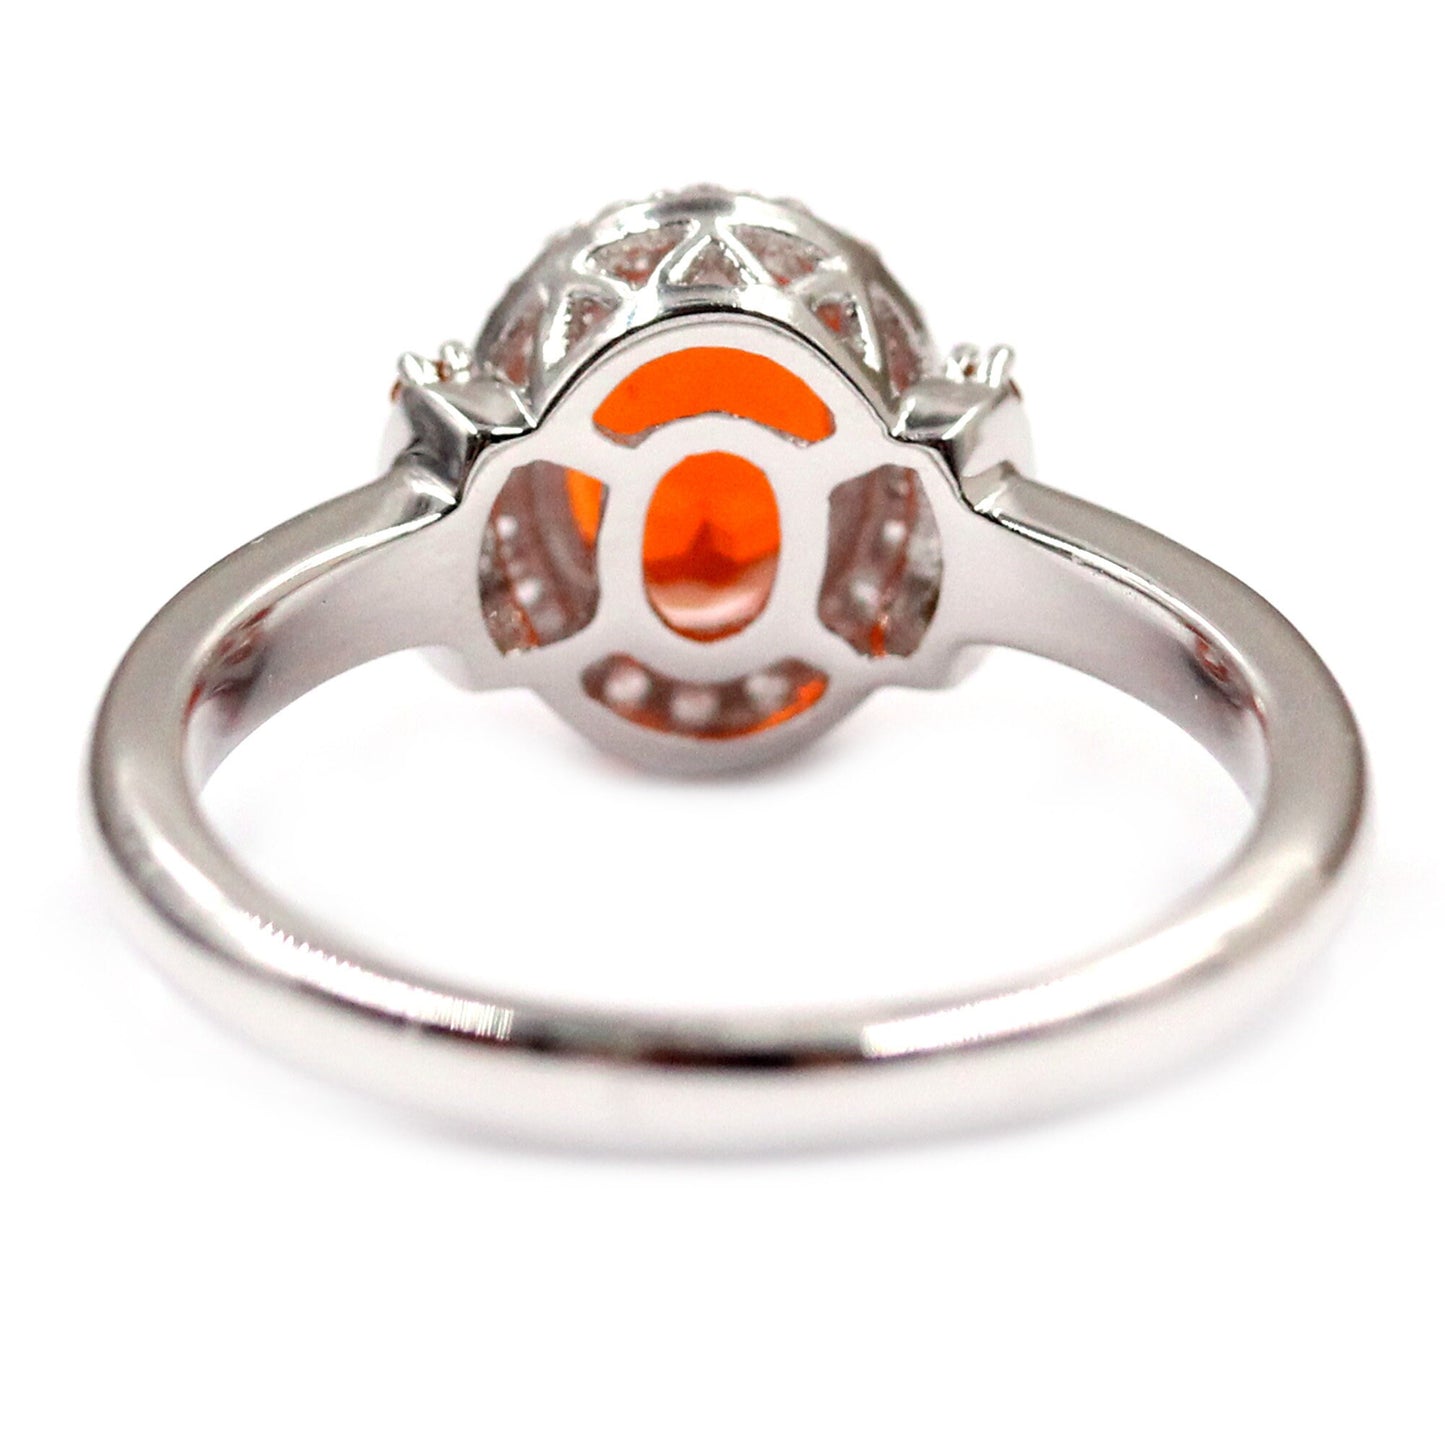 Orange Opal With Madeira Citrine Gemstone Ring, 925 Sterling Silver Ring, Engagement Ring, Birthstone Jewelry Anniversary Gift-Gift For Her